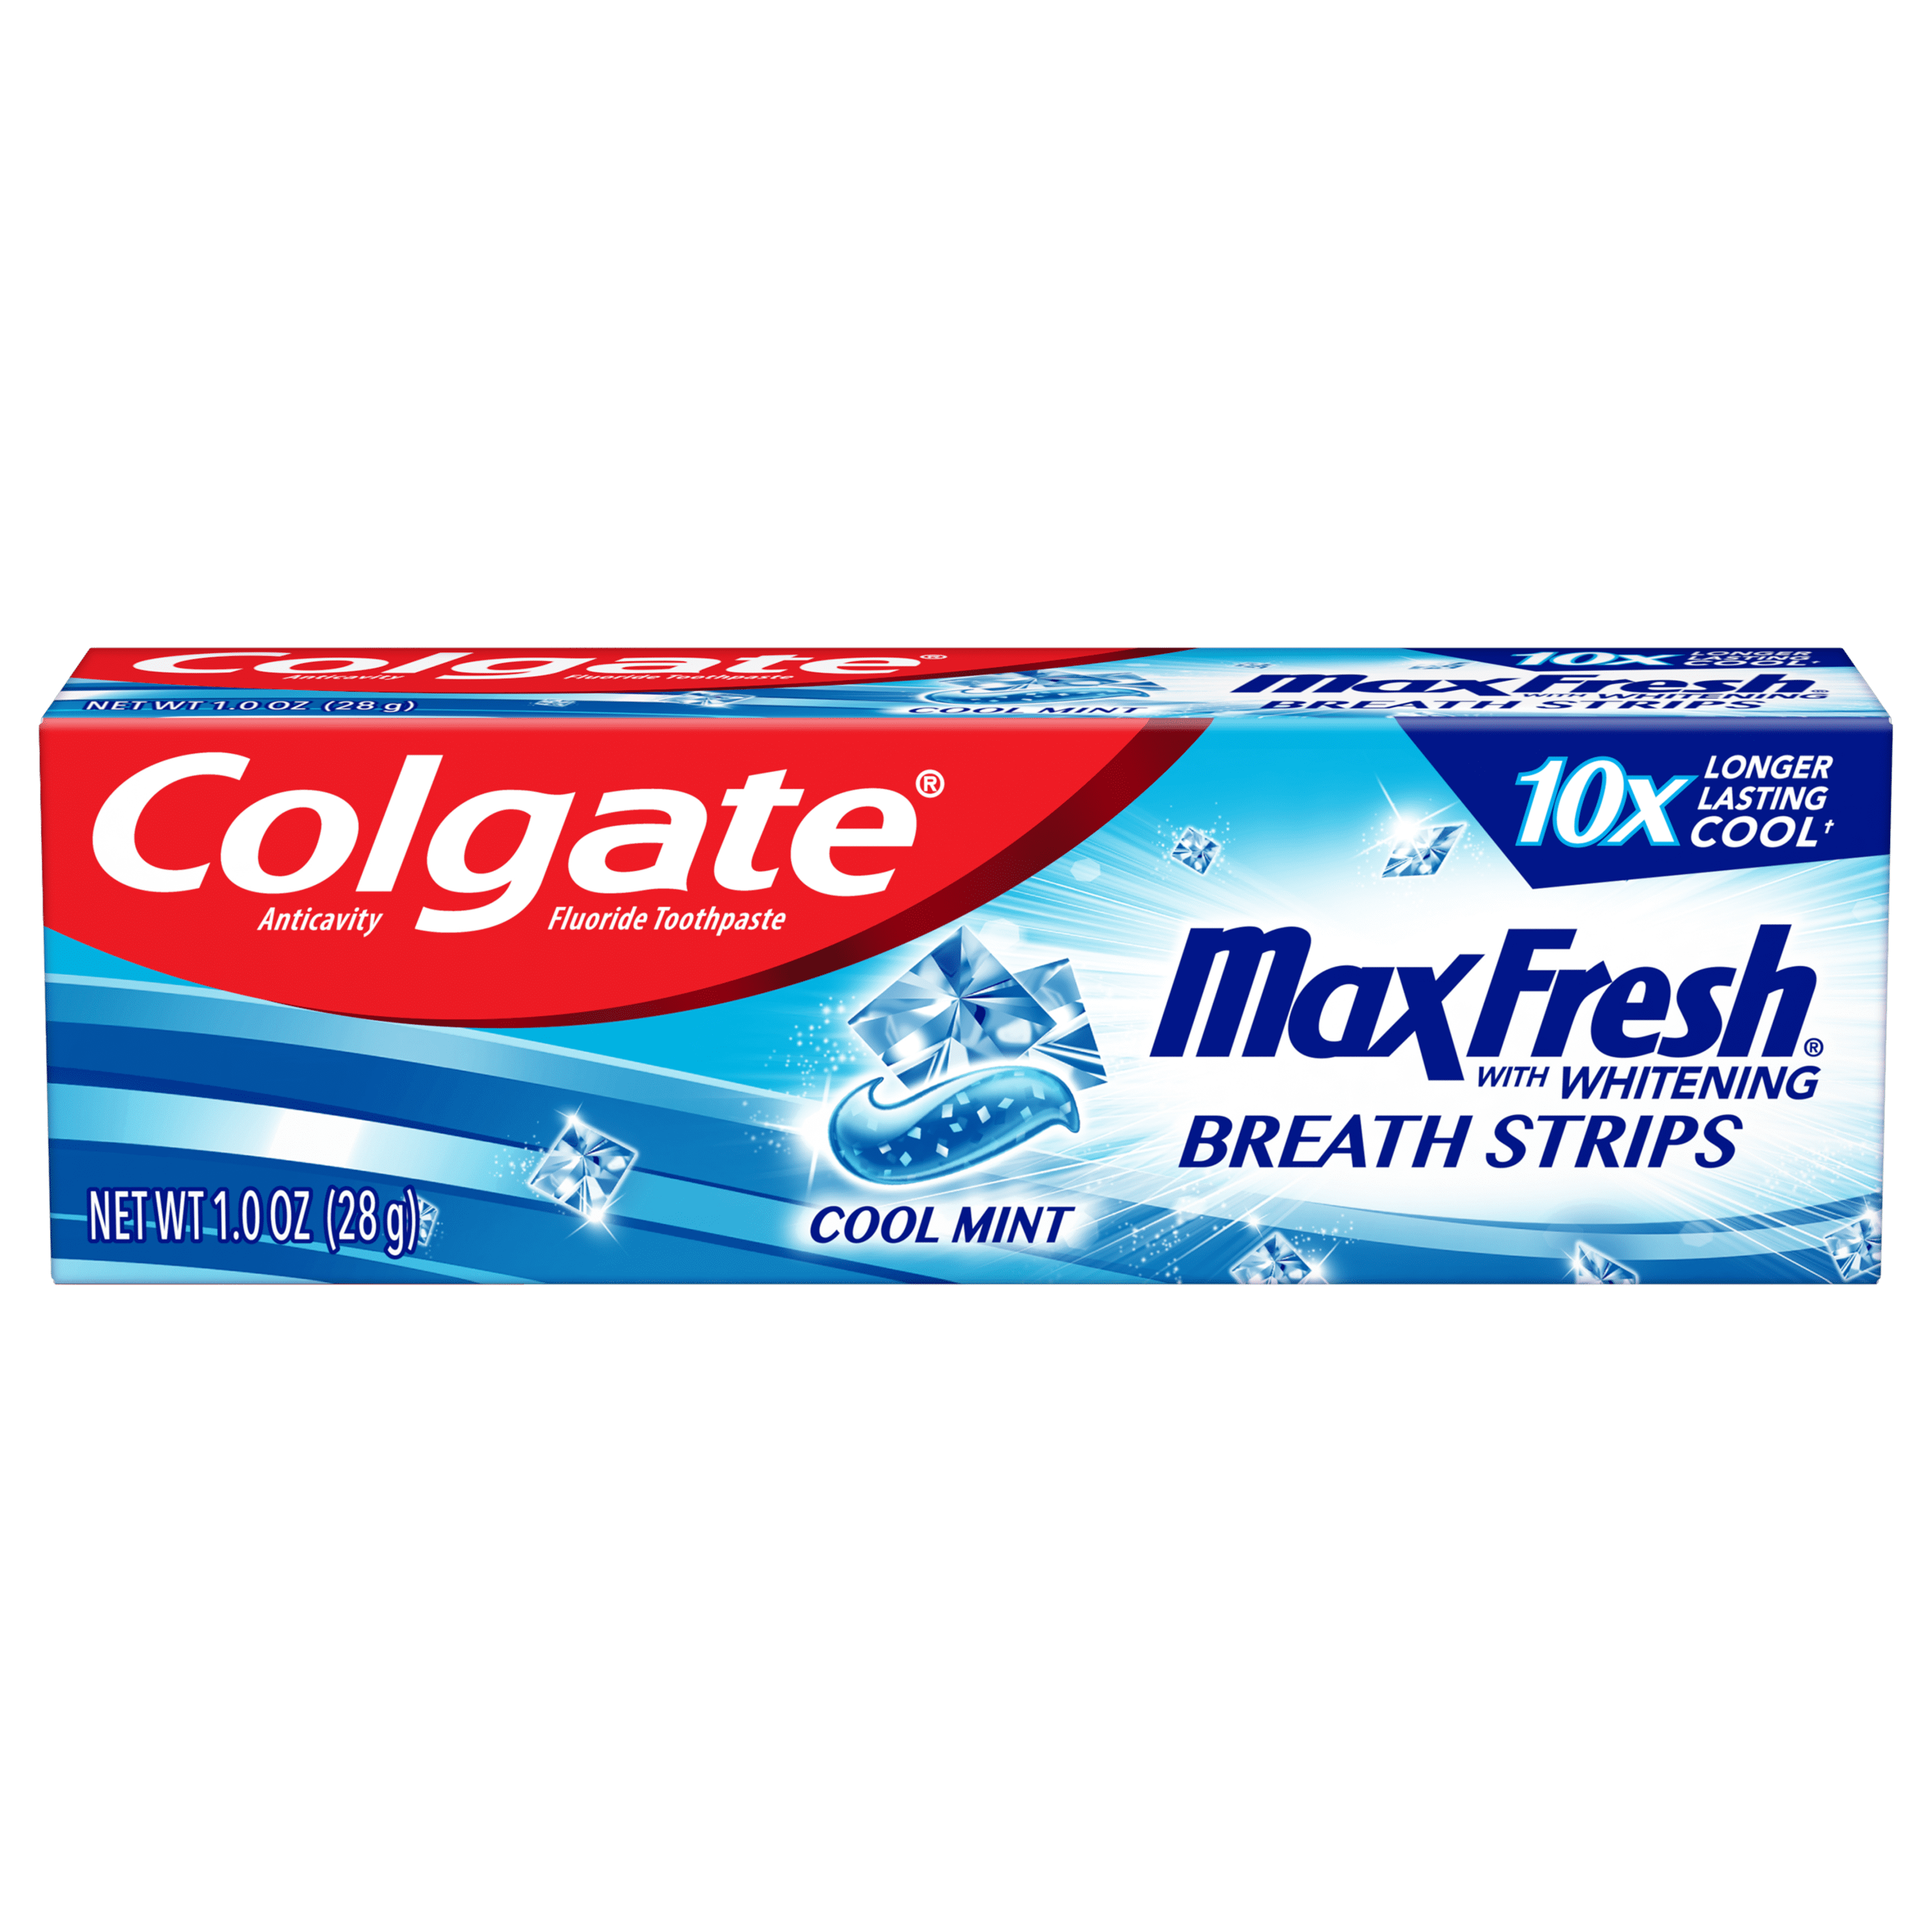 Colgate Max Fresh Travel Size Toothpaste with Mini Breath Strips